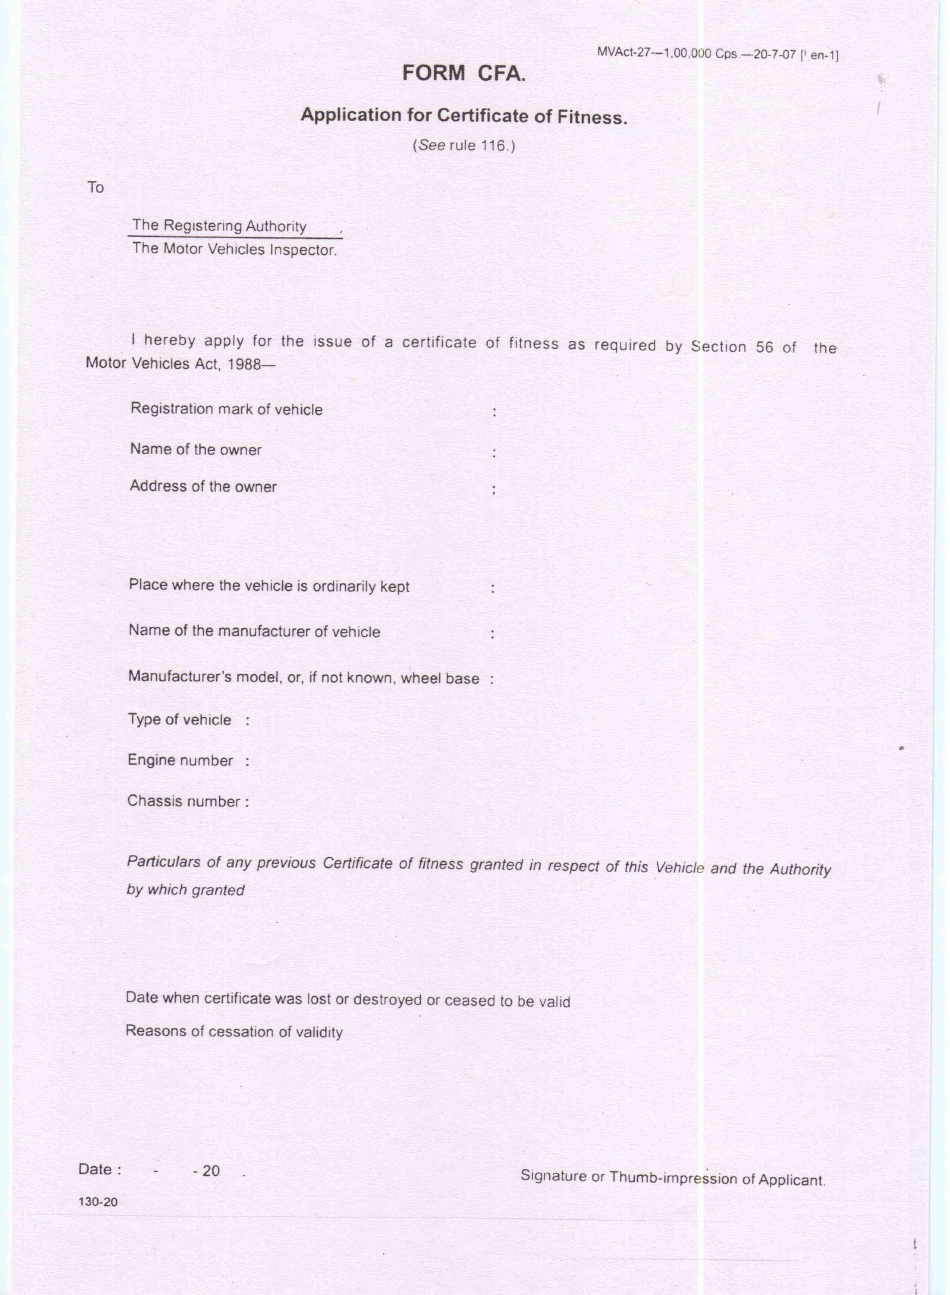 Form CFA Application for Certificate of Fitness - Tamil Nadu, India, Page 1